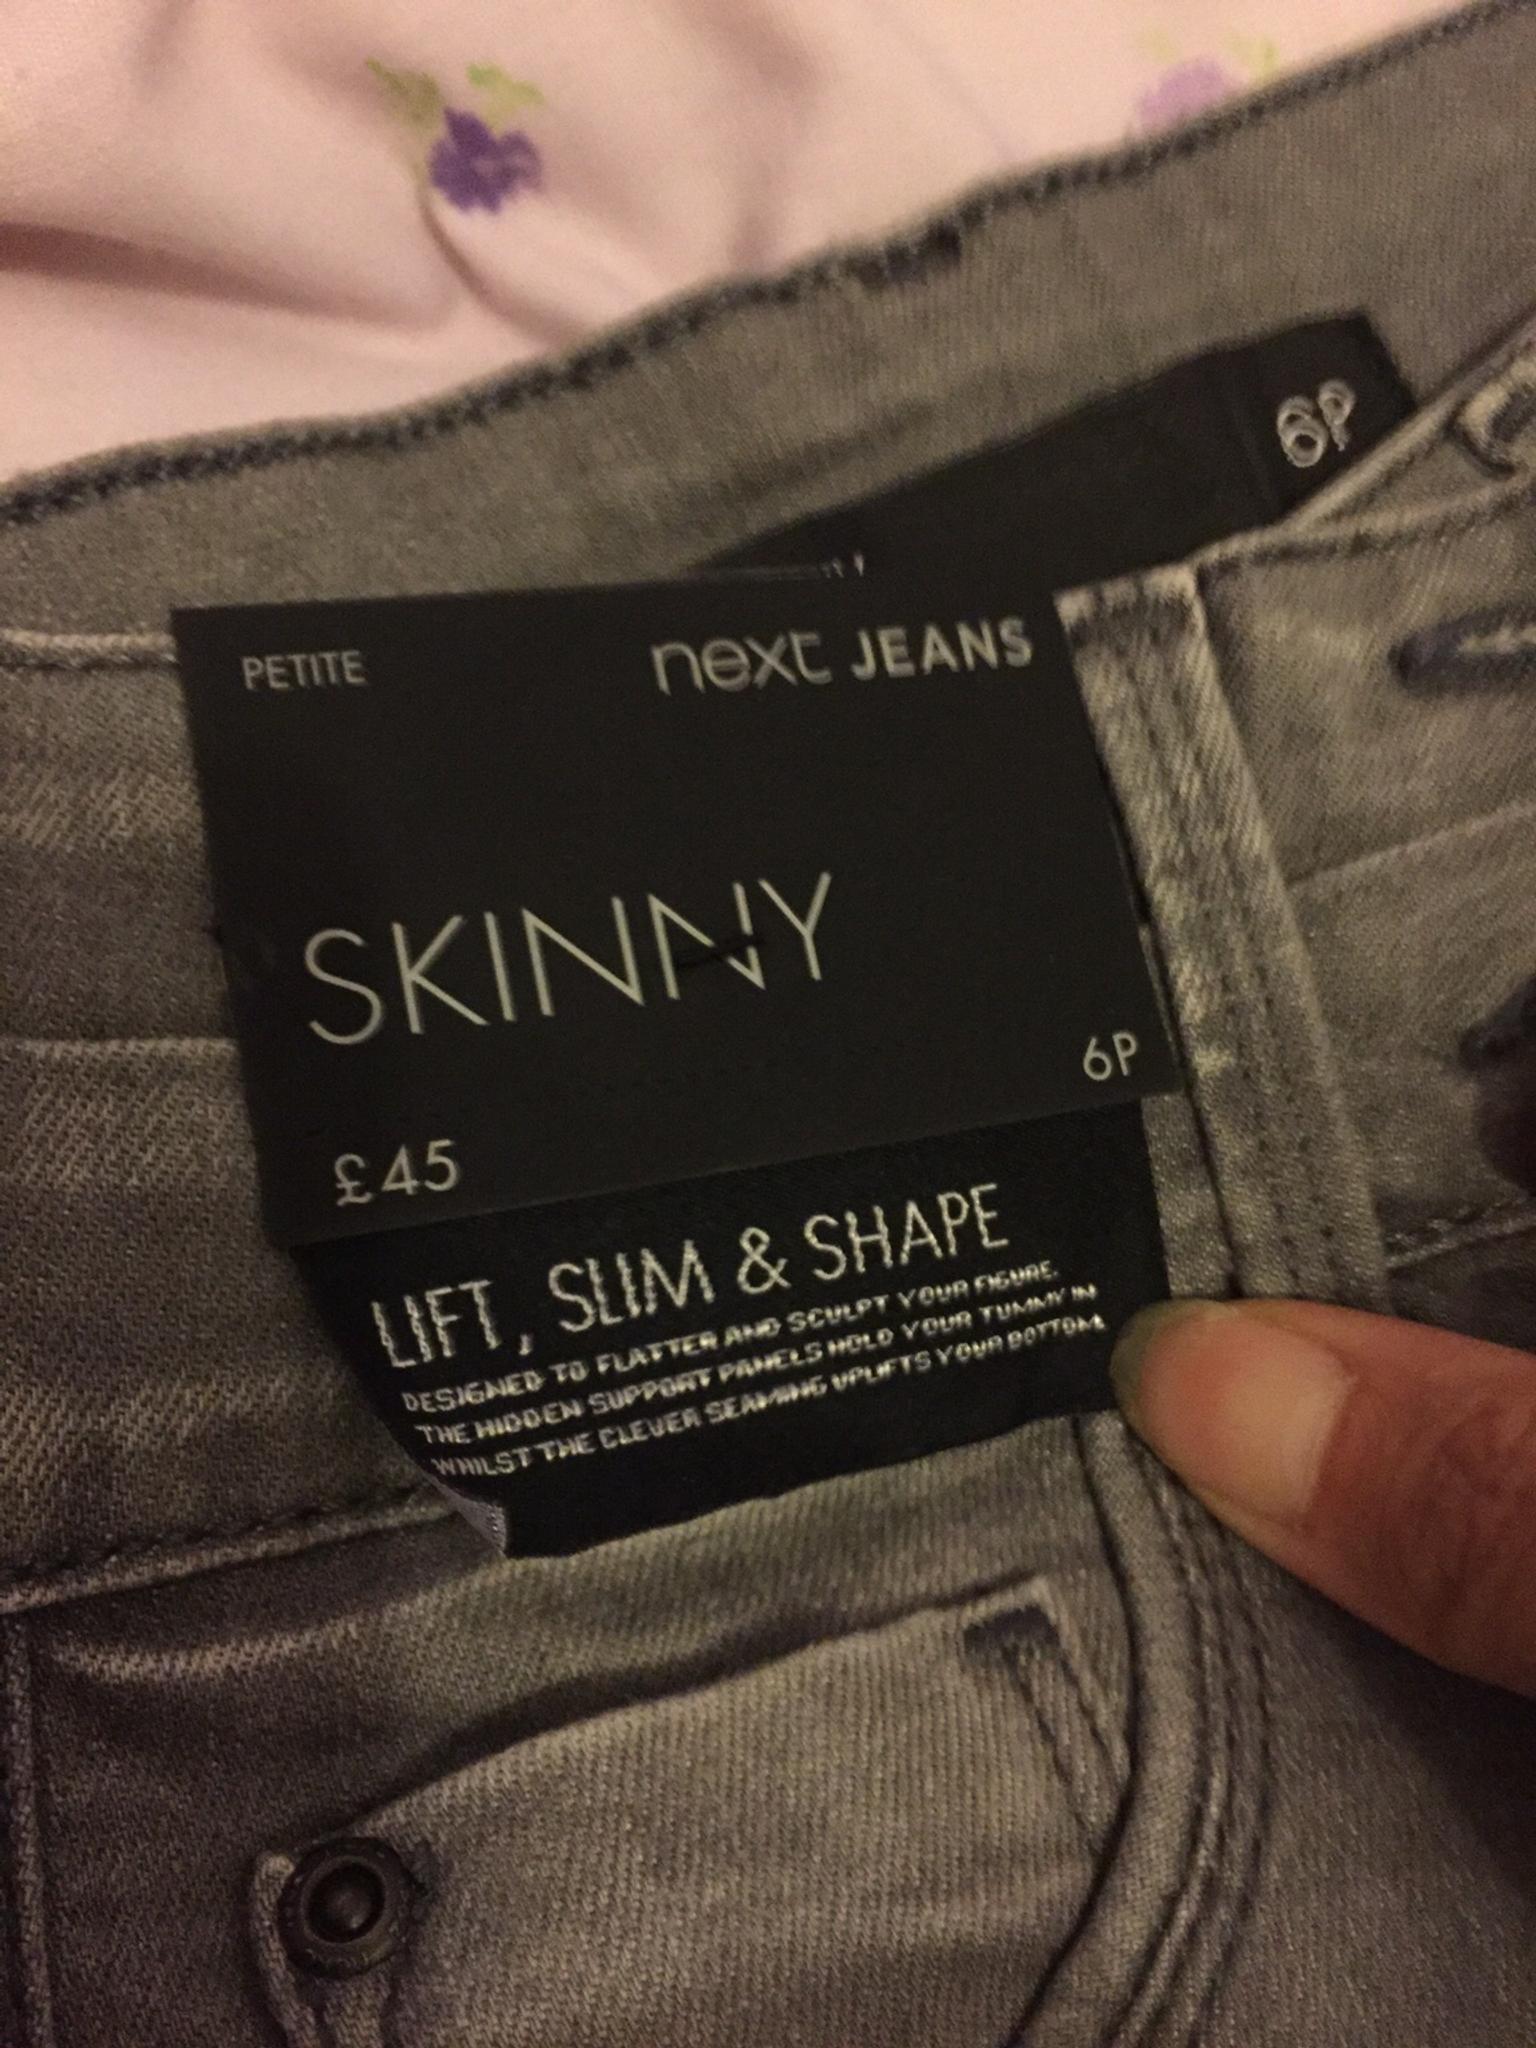 Next Grey Skinny Jeans Size 6 Petite In So18 Eastleigh For 15 00 For Sale Shpock